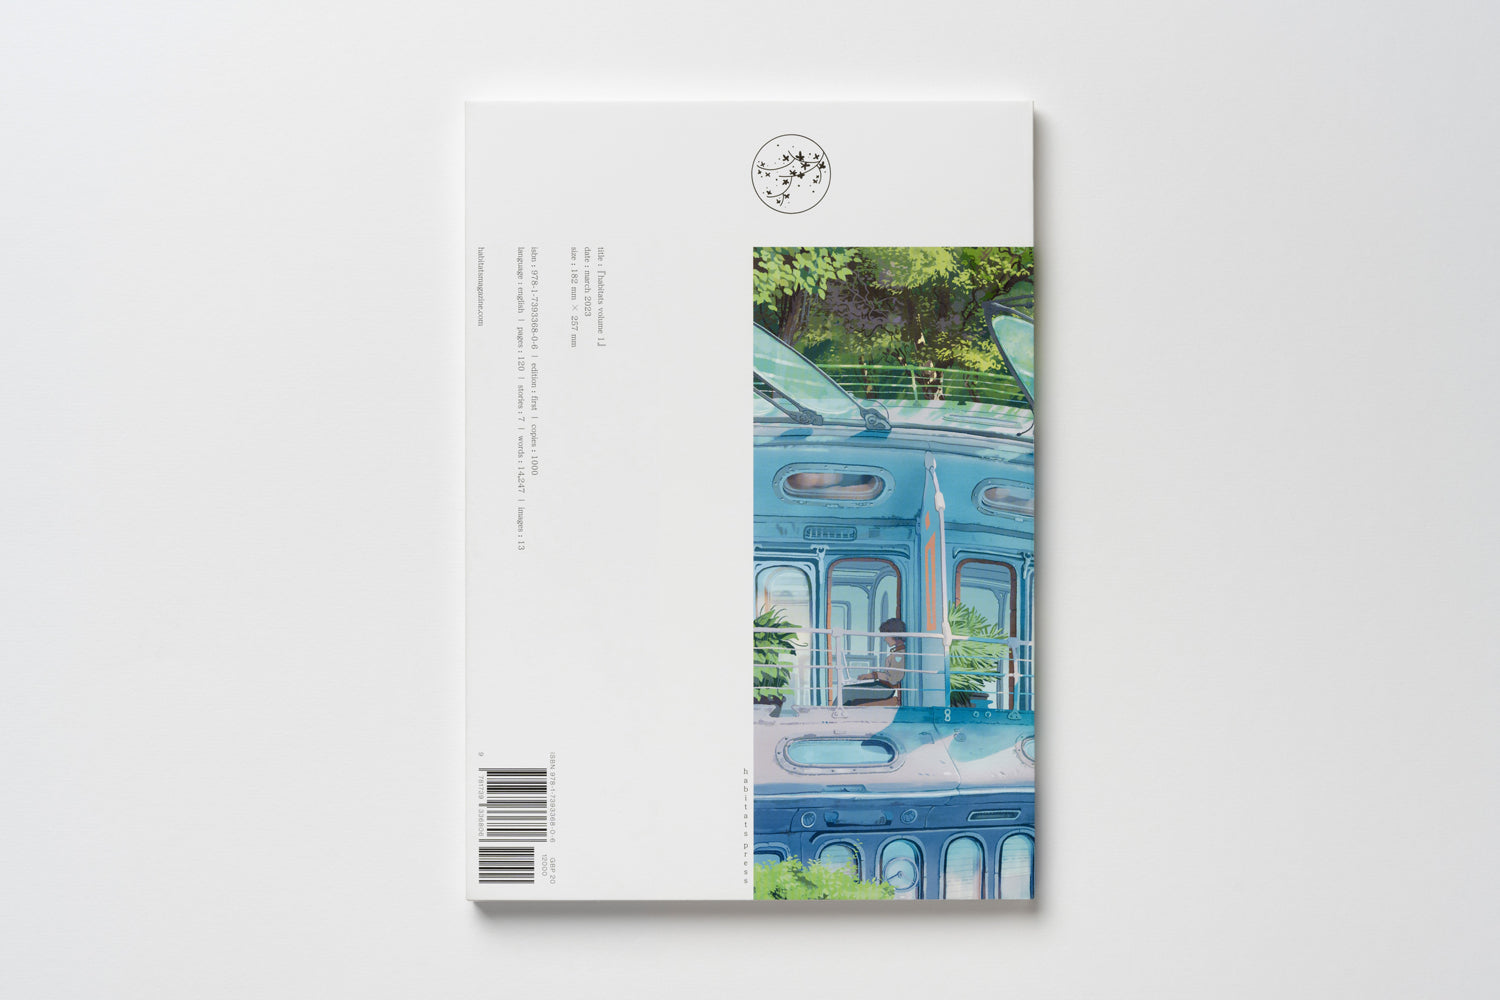 A photo of the back of Habitats Volume 1's dust jacket, continuing the illustration with a wraparound section. The publishing details and barcode appear on the other side.